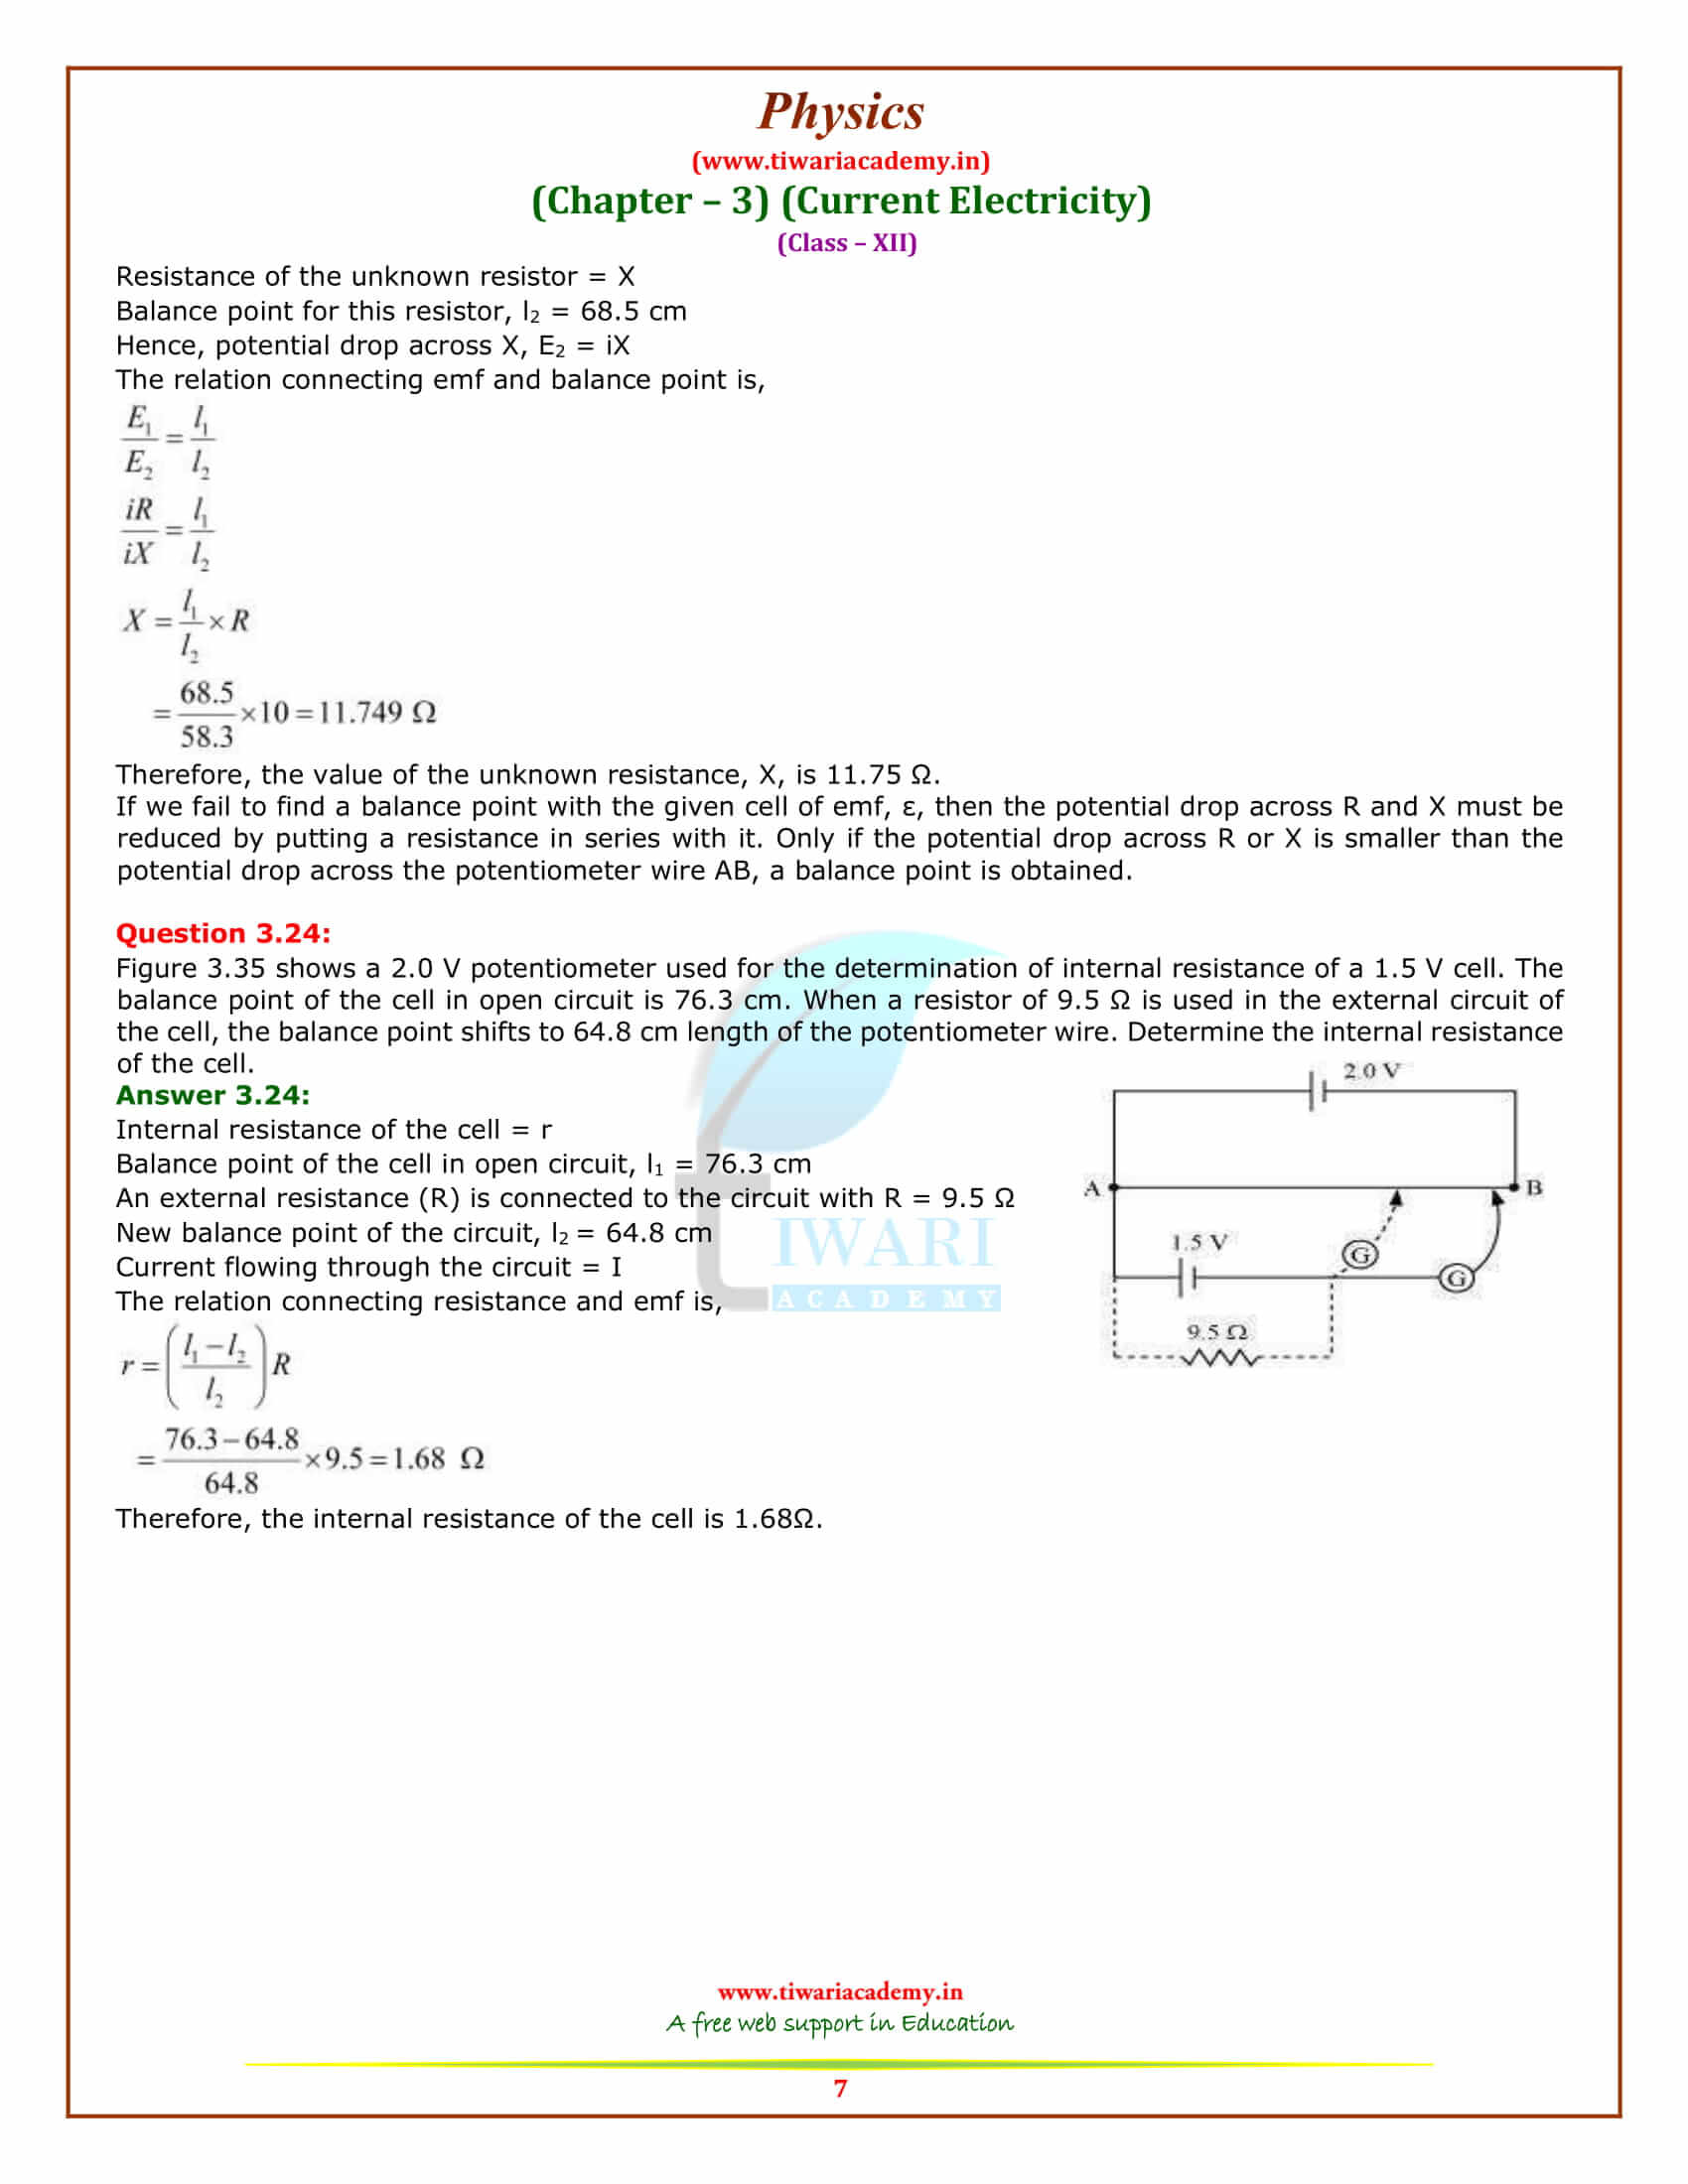 NCERT Solutions for Class 12 Physics Chapter 3 Current Electricity additional exercises free pdf